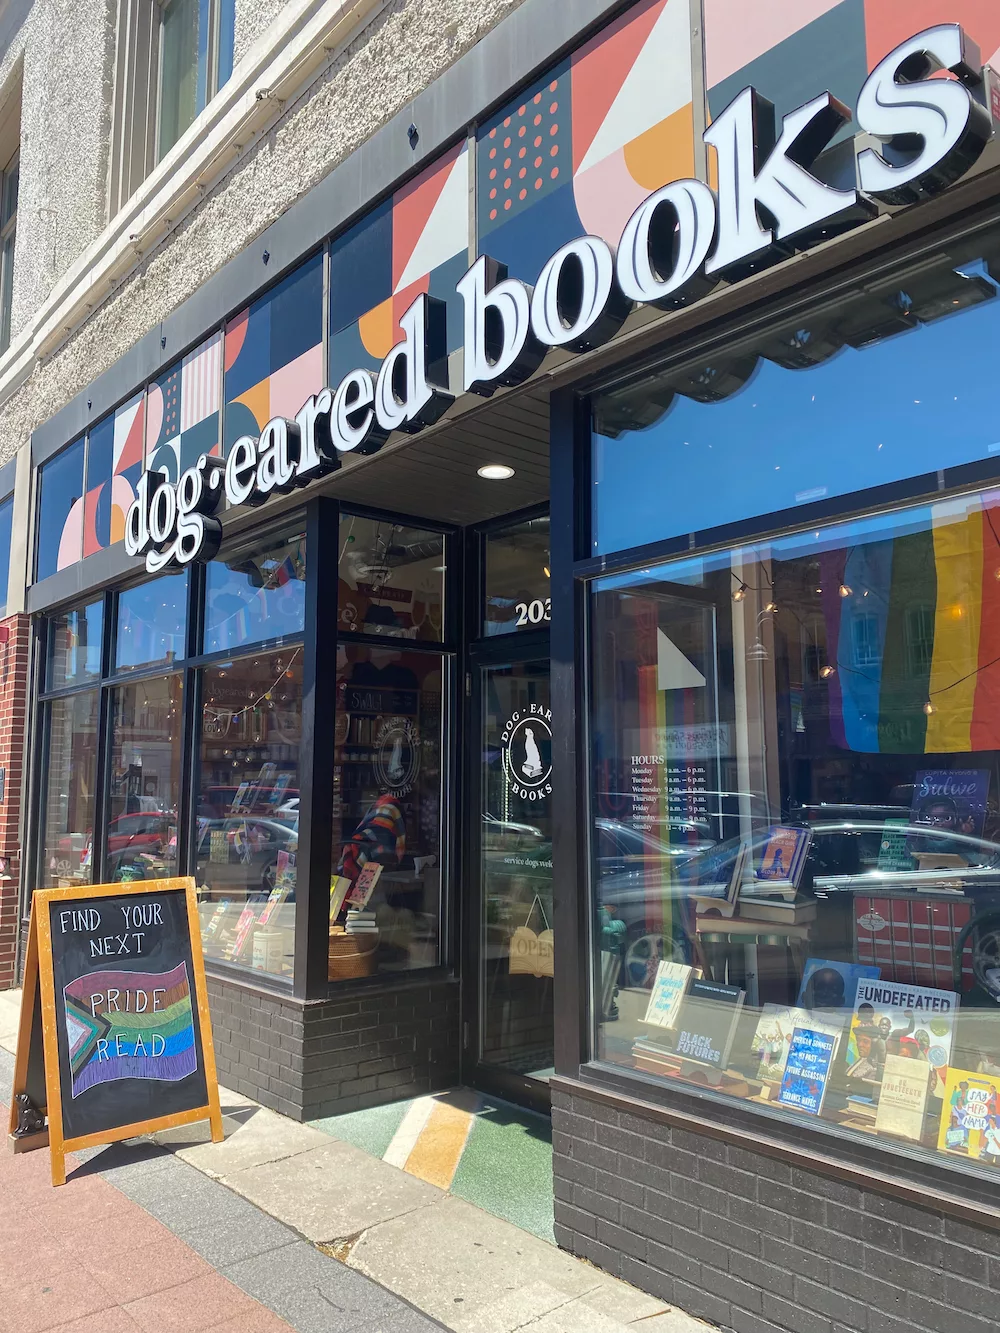 Exterior of Dogeared Books in Ames, Iowa